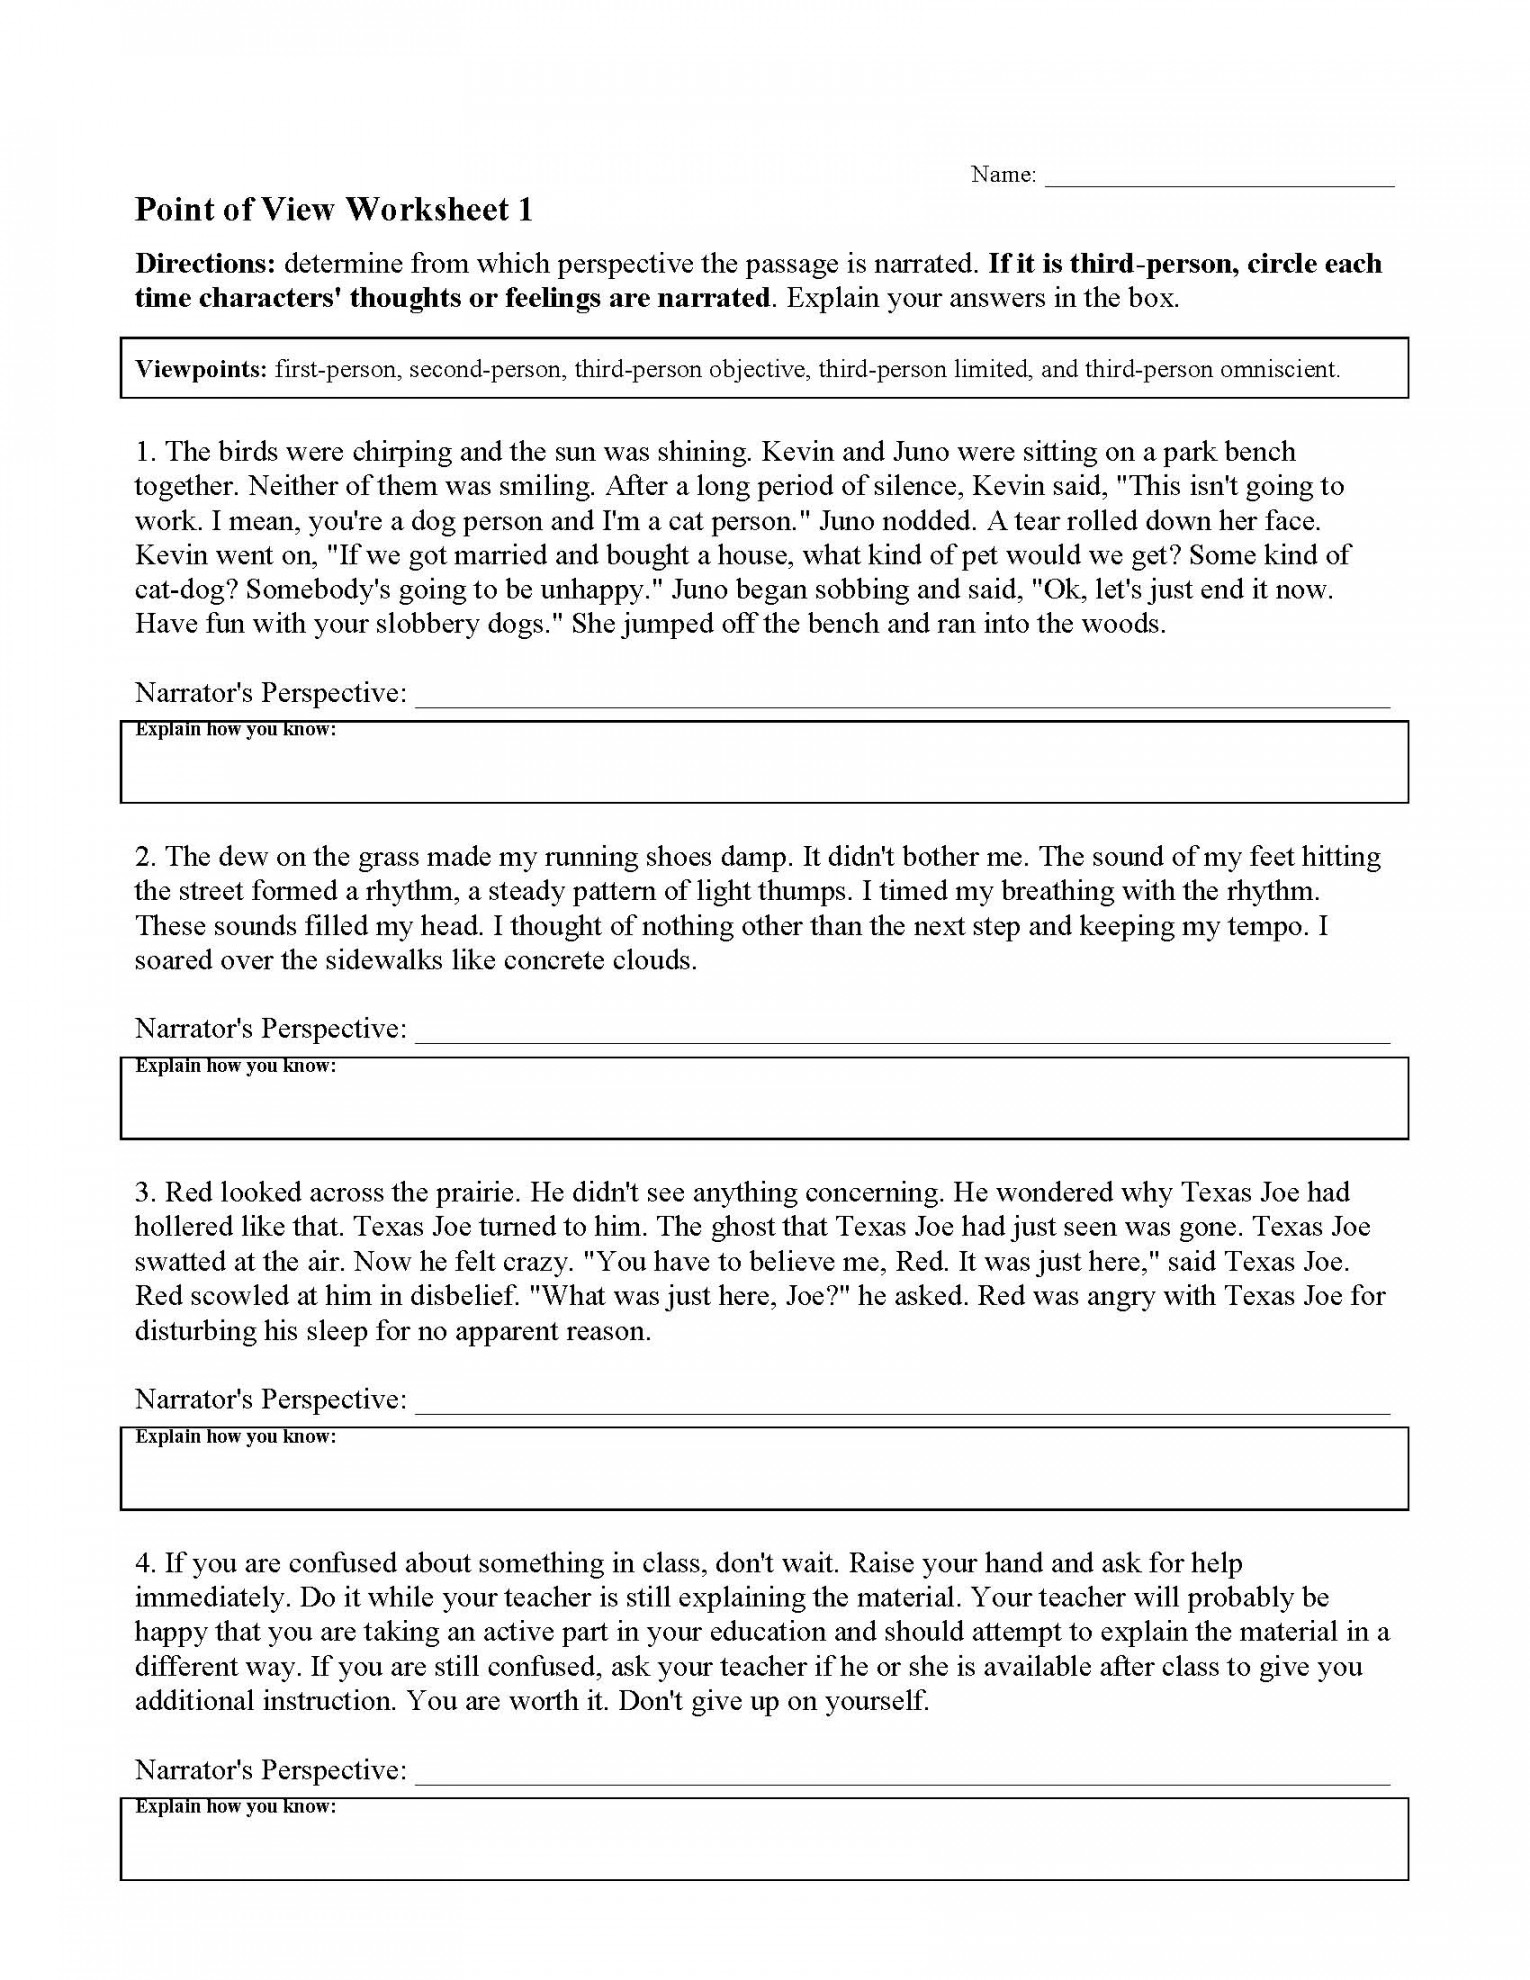 Point of View Worksheet   Reading Activity